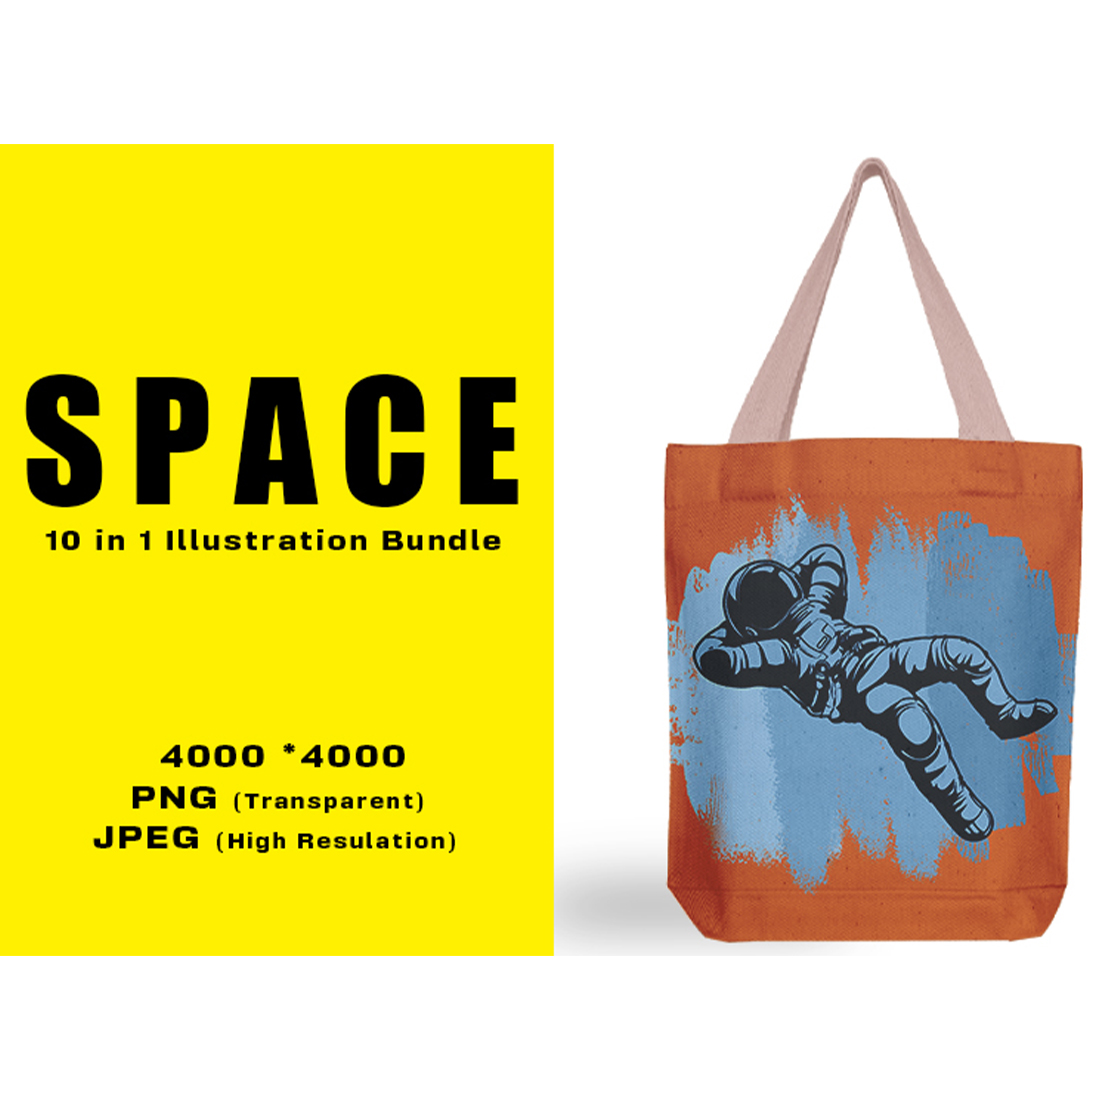 Image of a bag with an amazing print on the theme of space